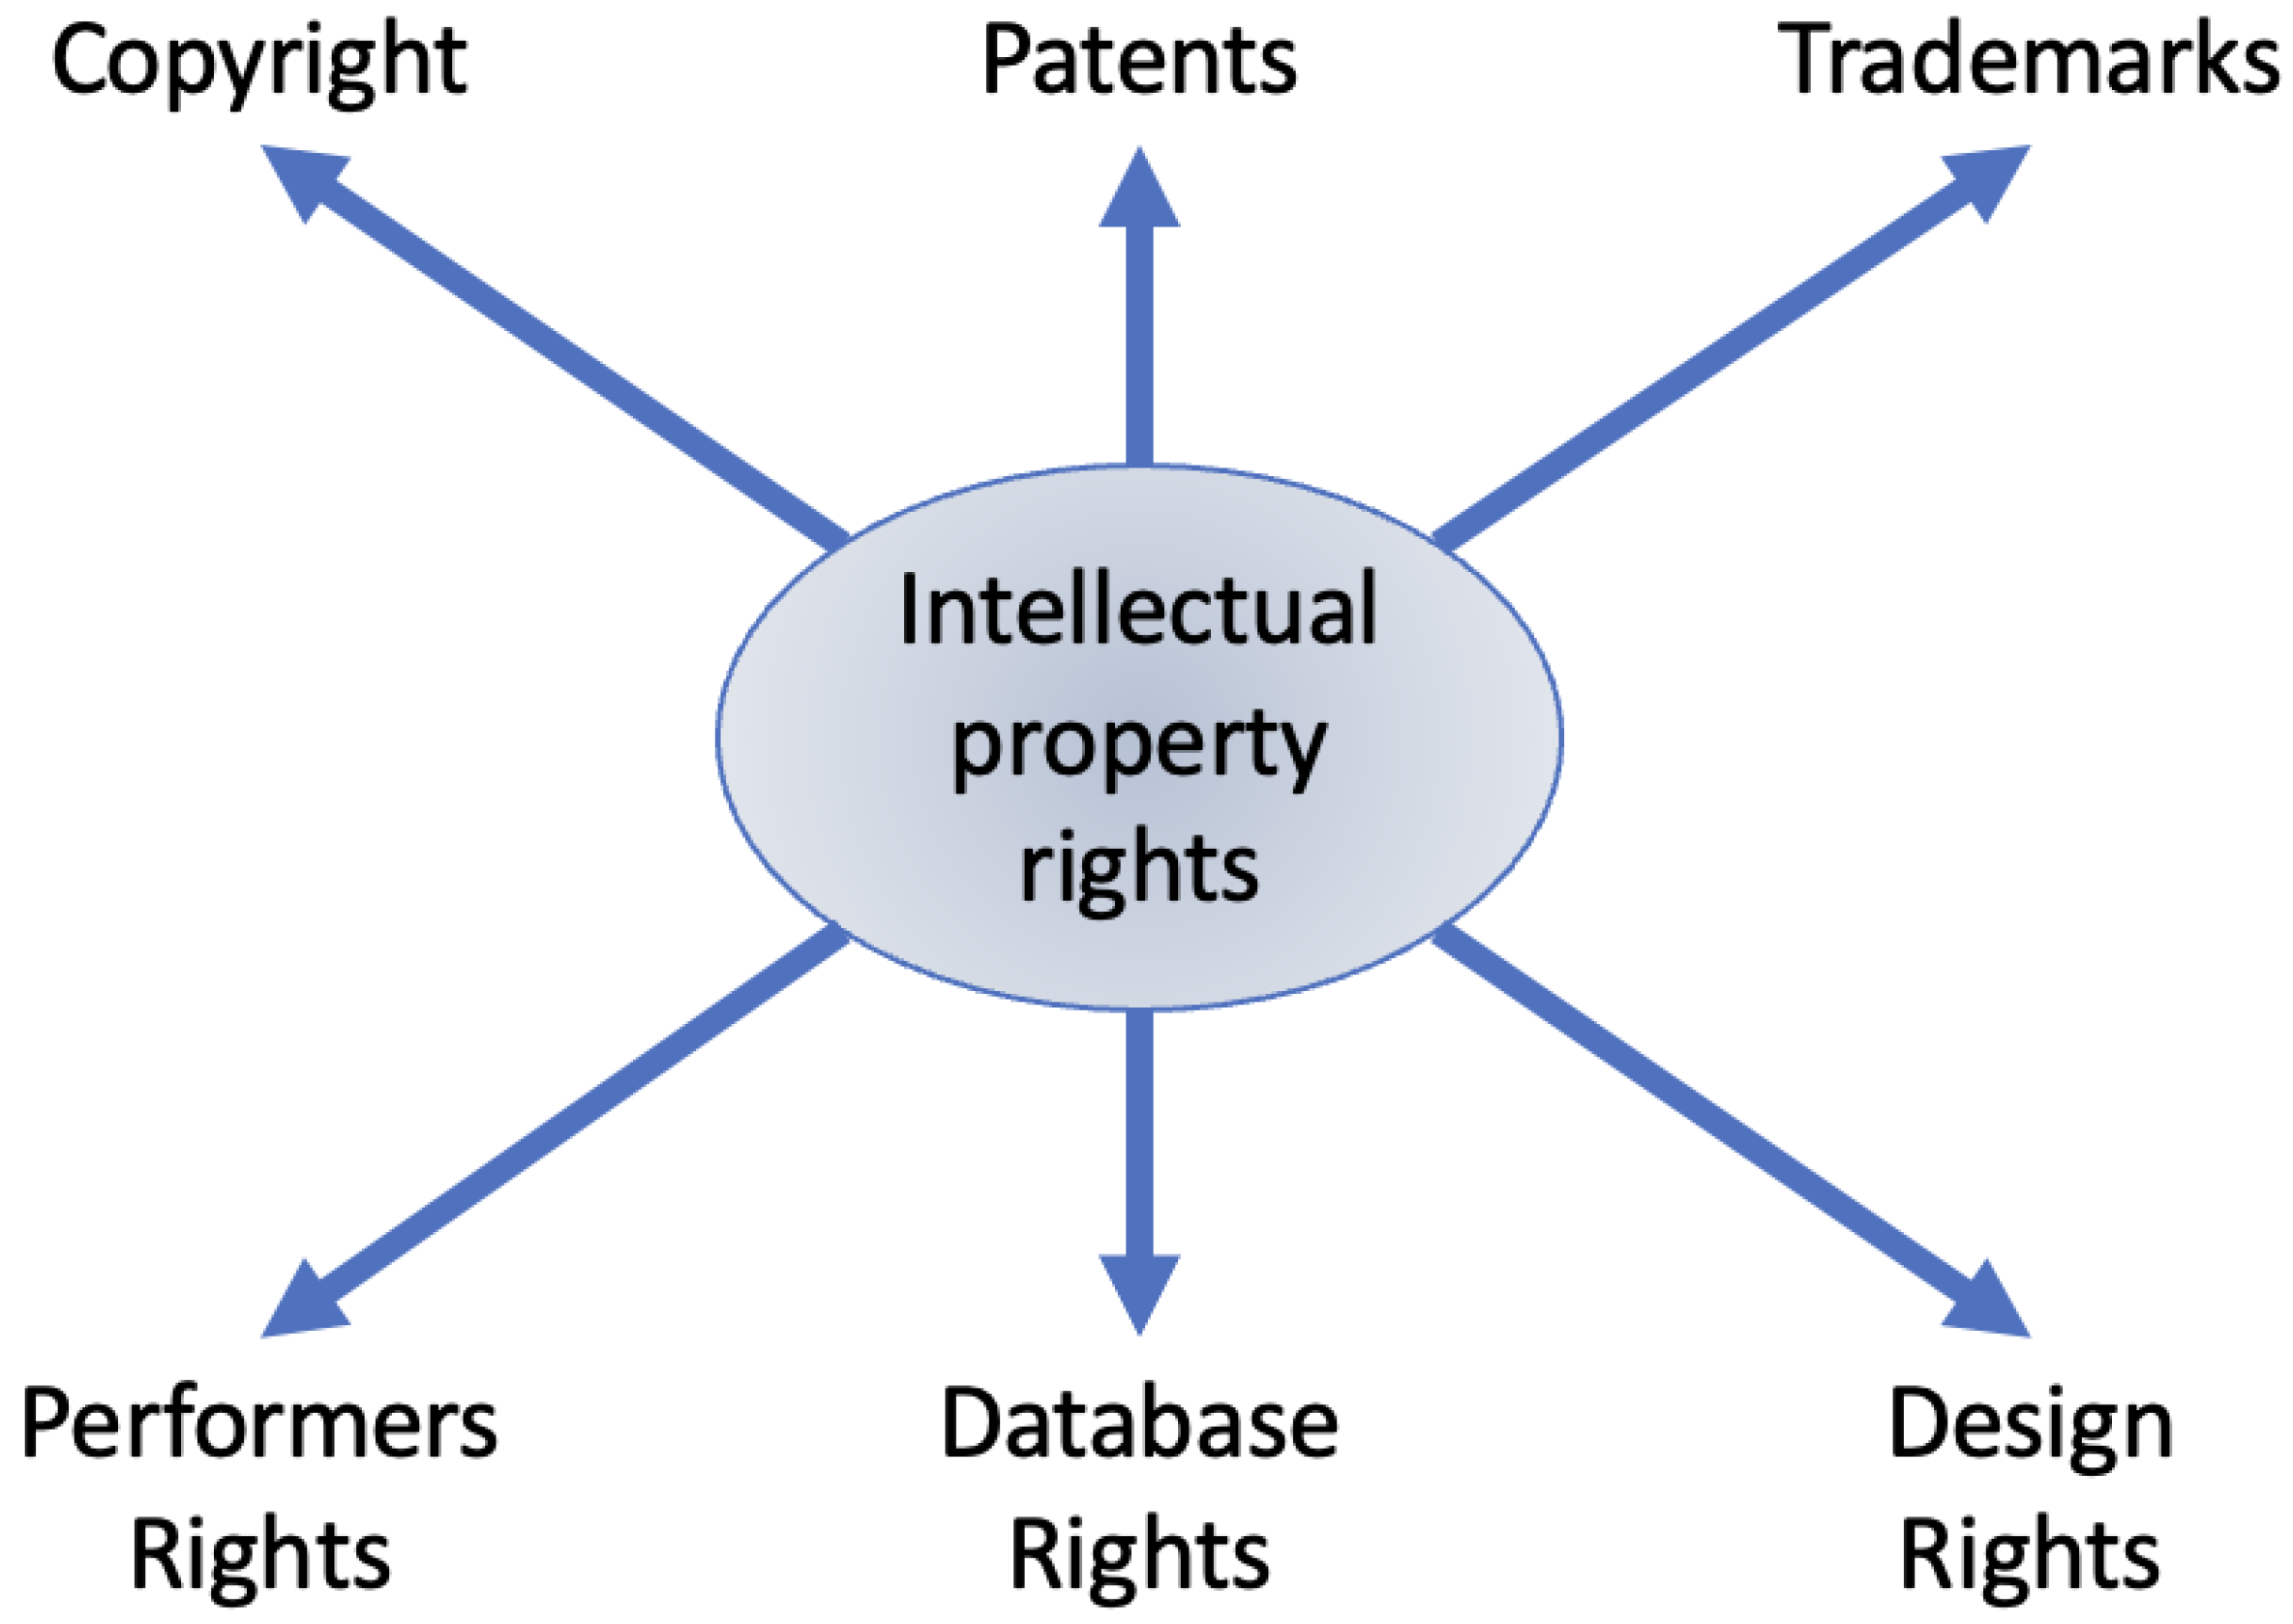 III. The Importance of Intellectual Property Rights in the Music World